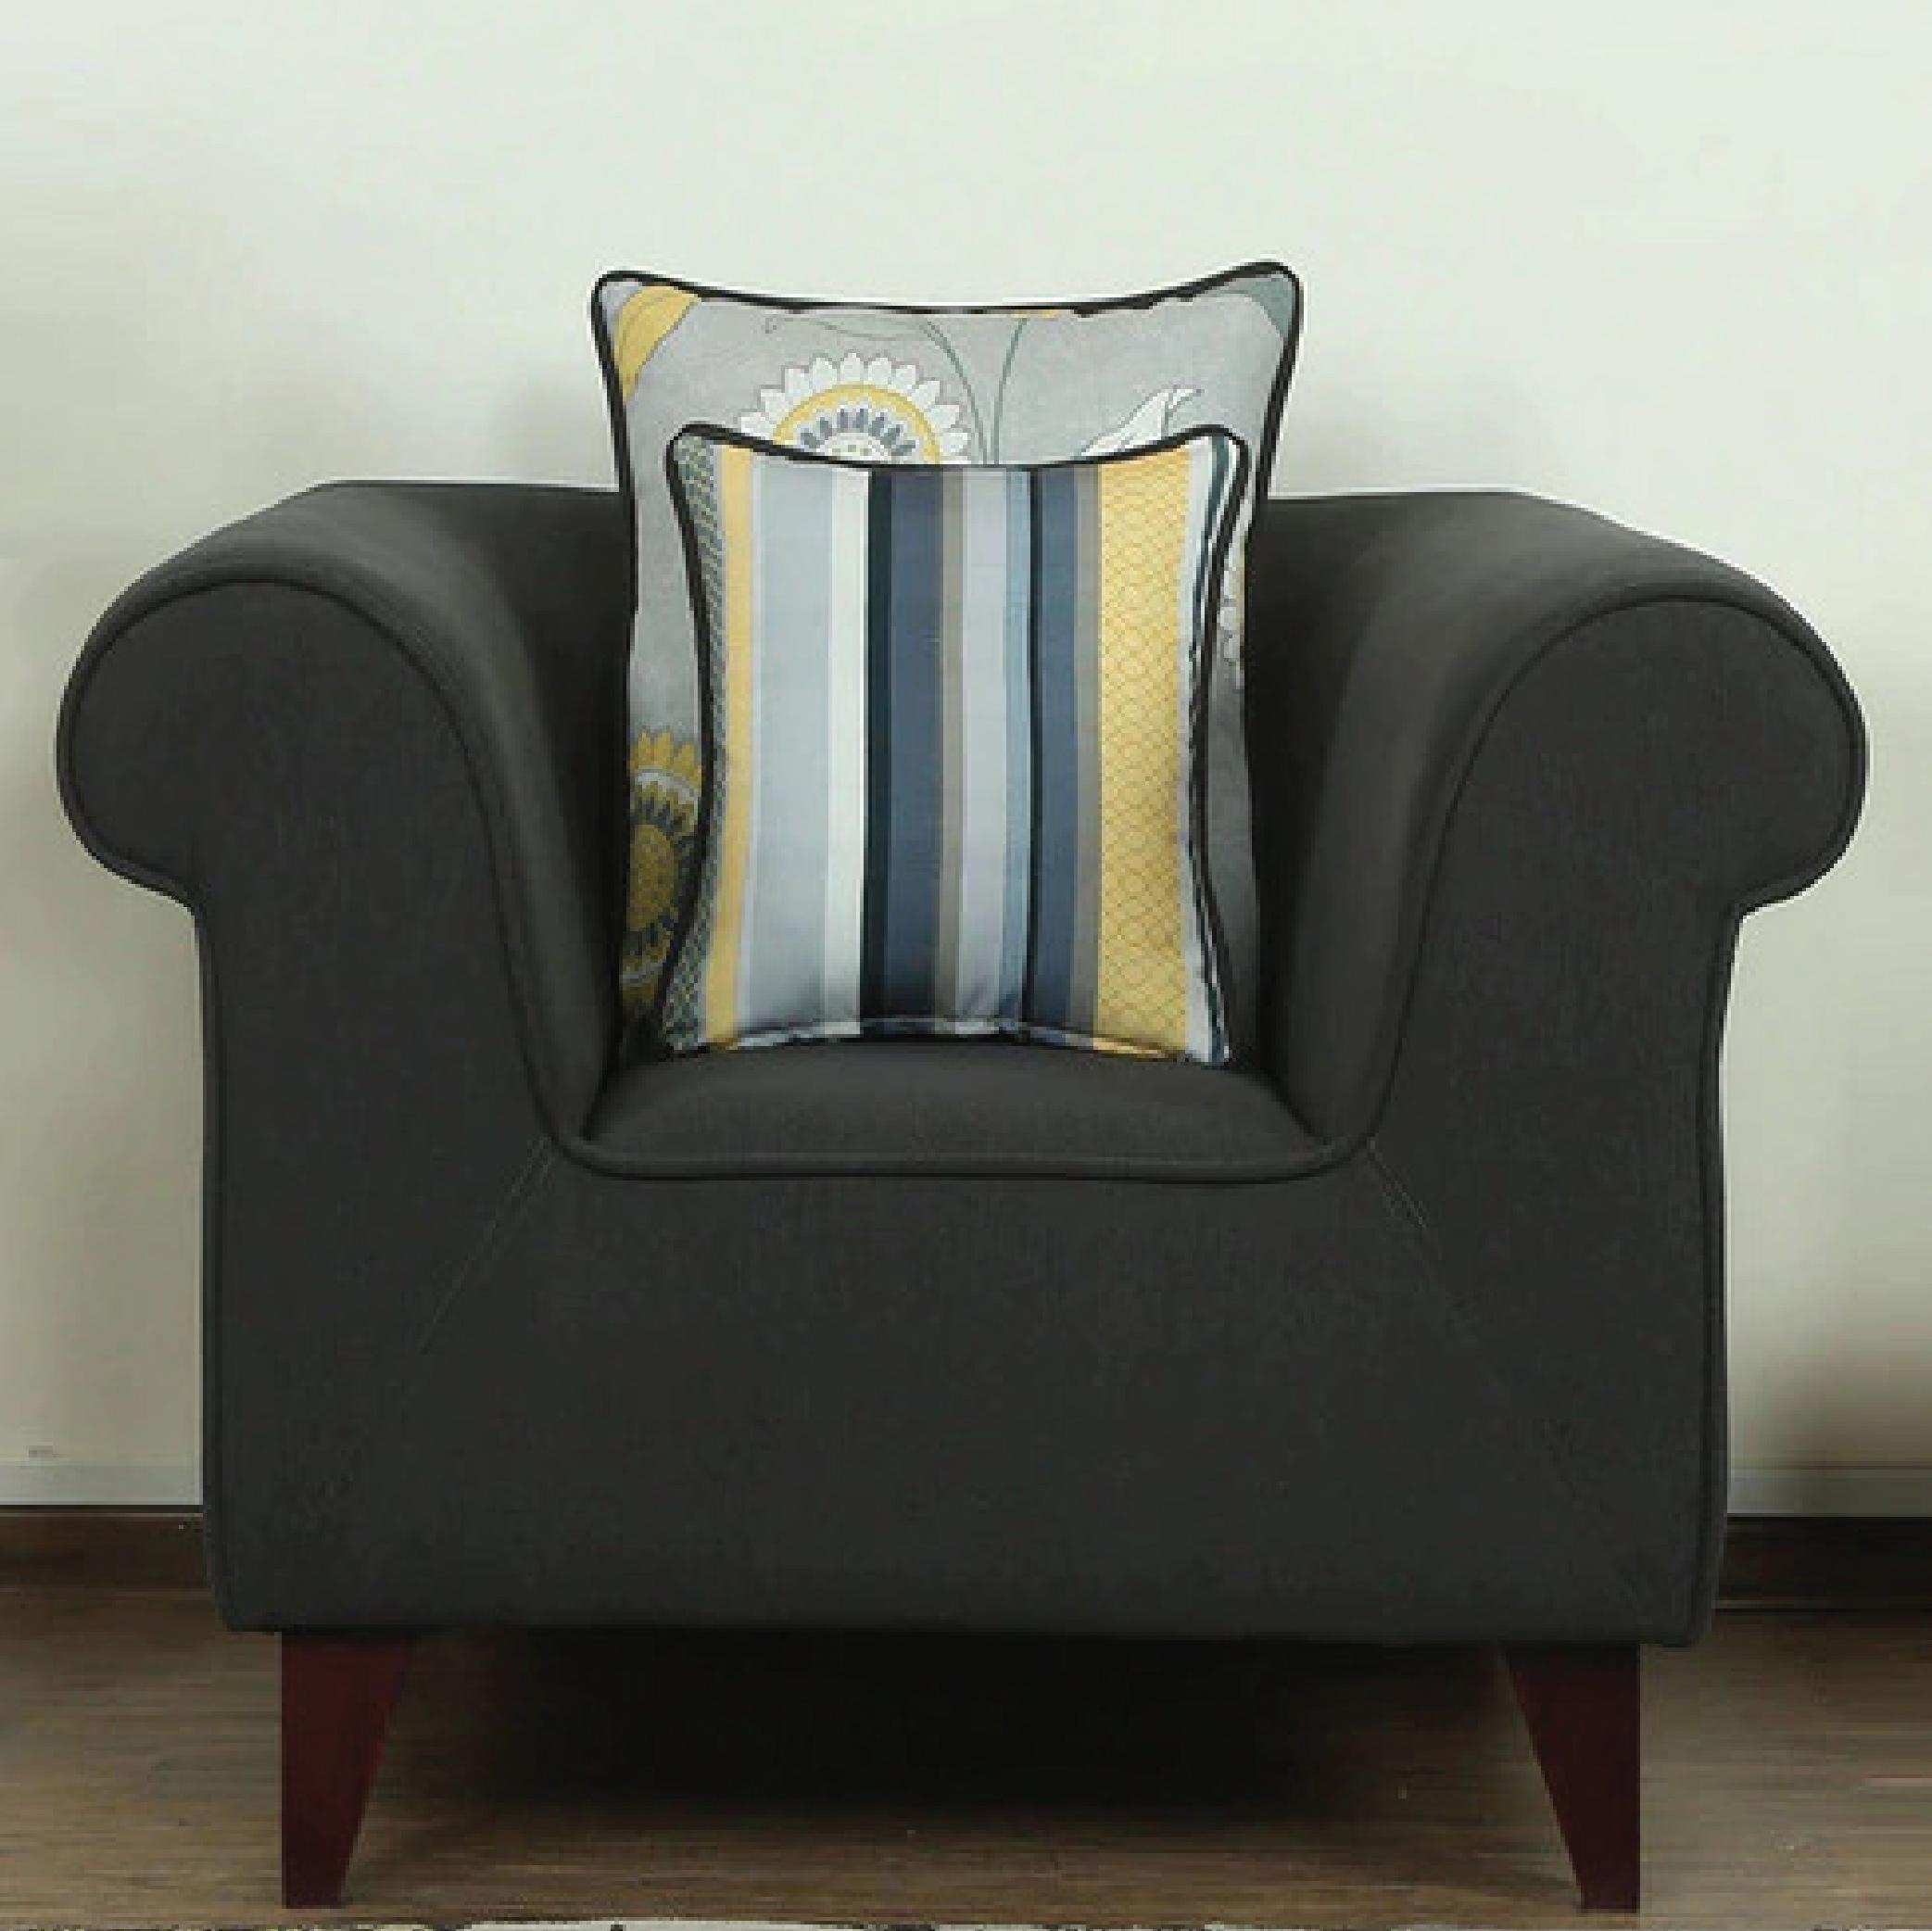 Salerno One Seater Sofa in Charcoal Grey Colour